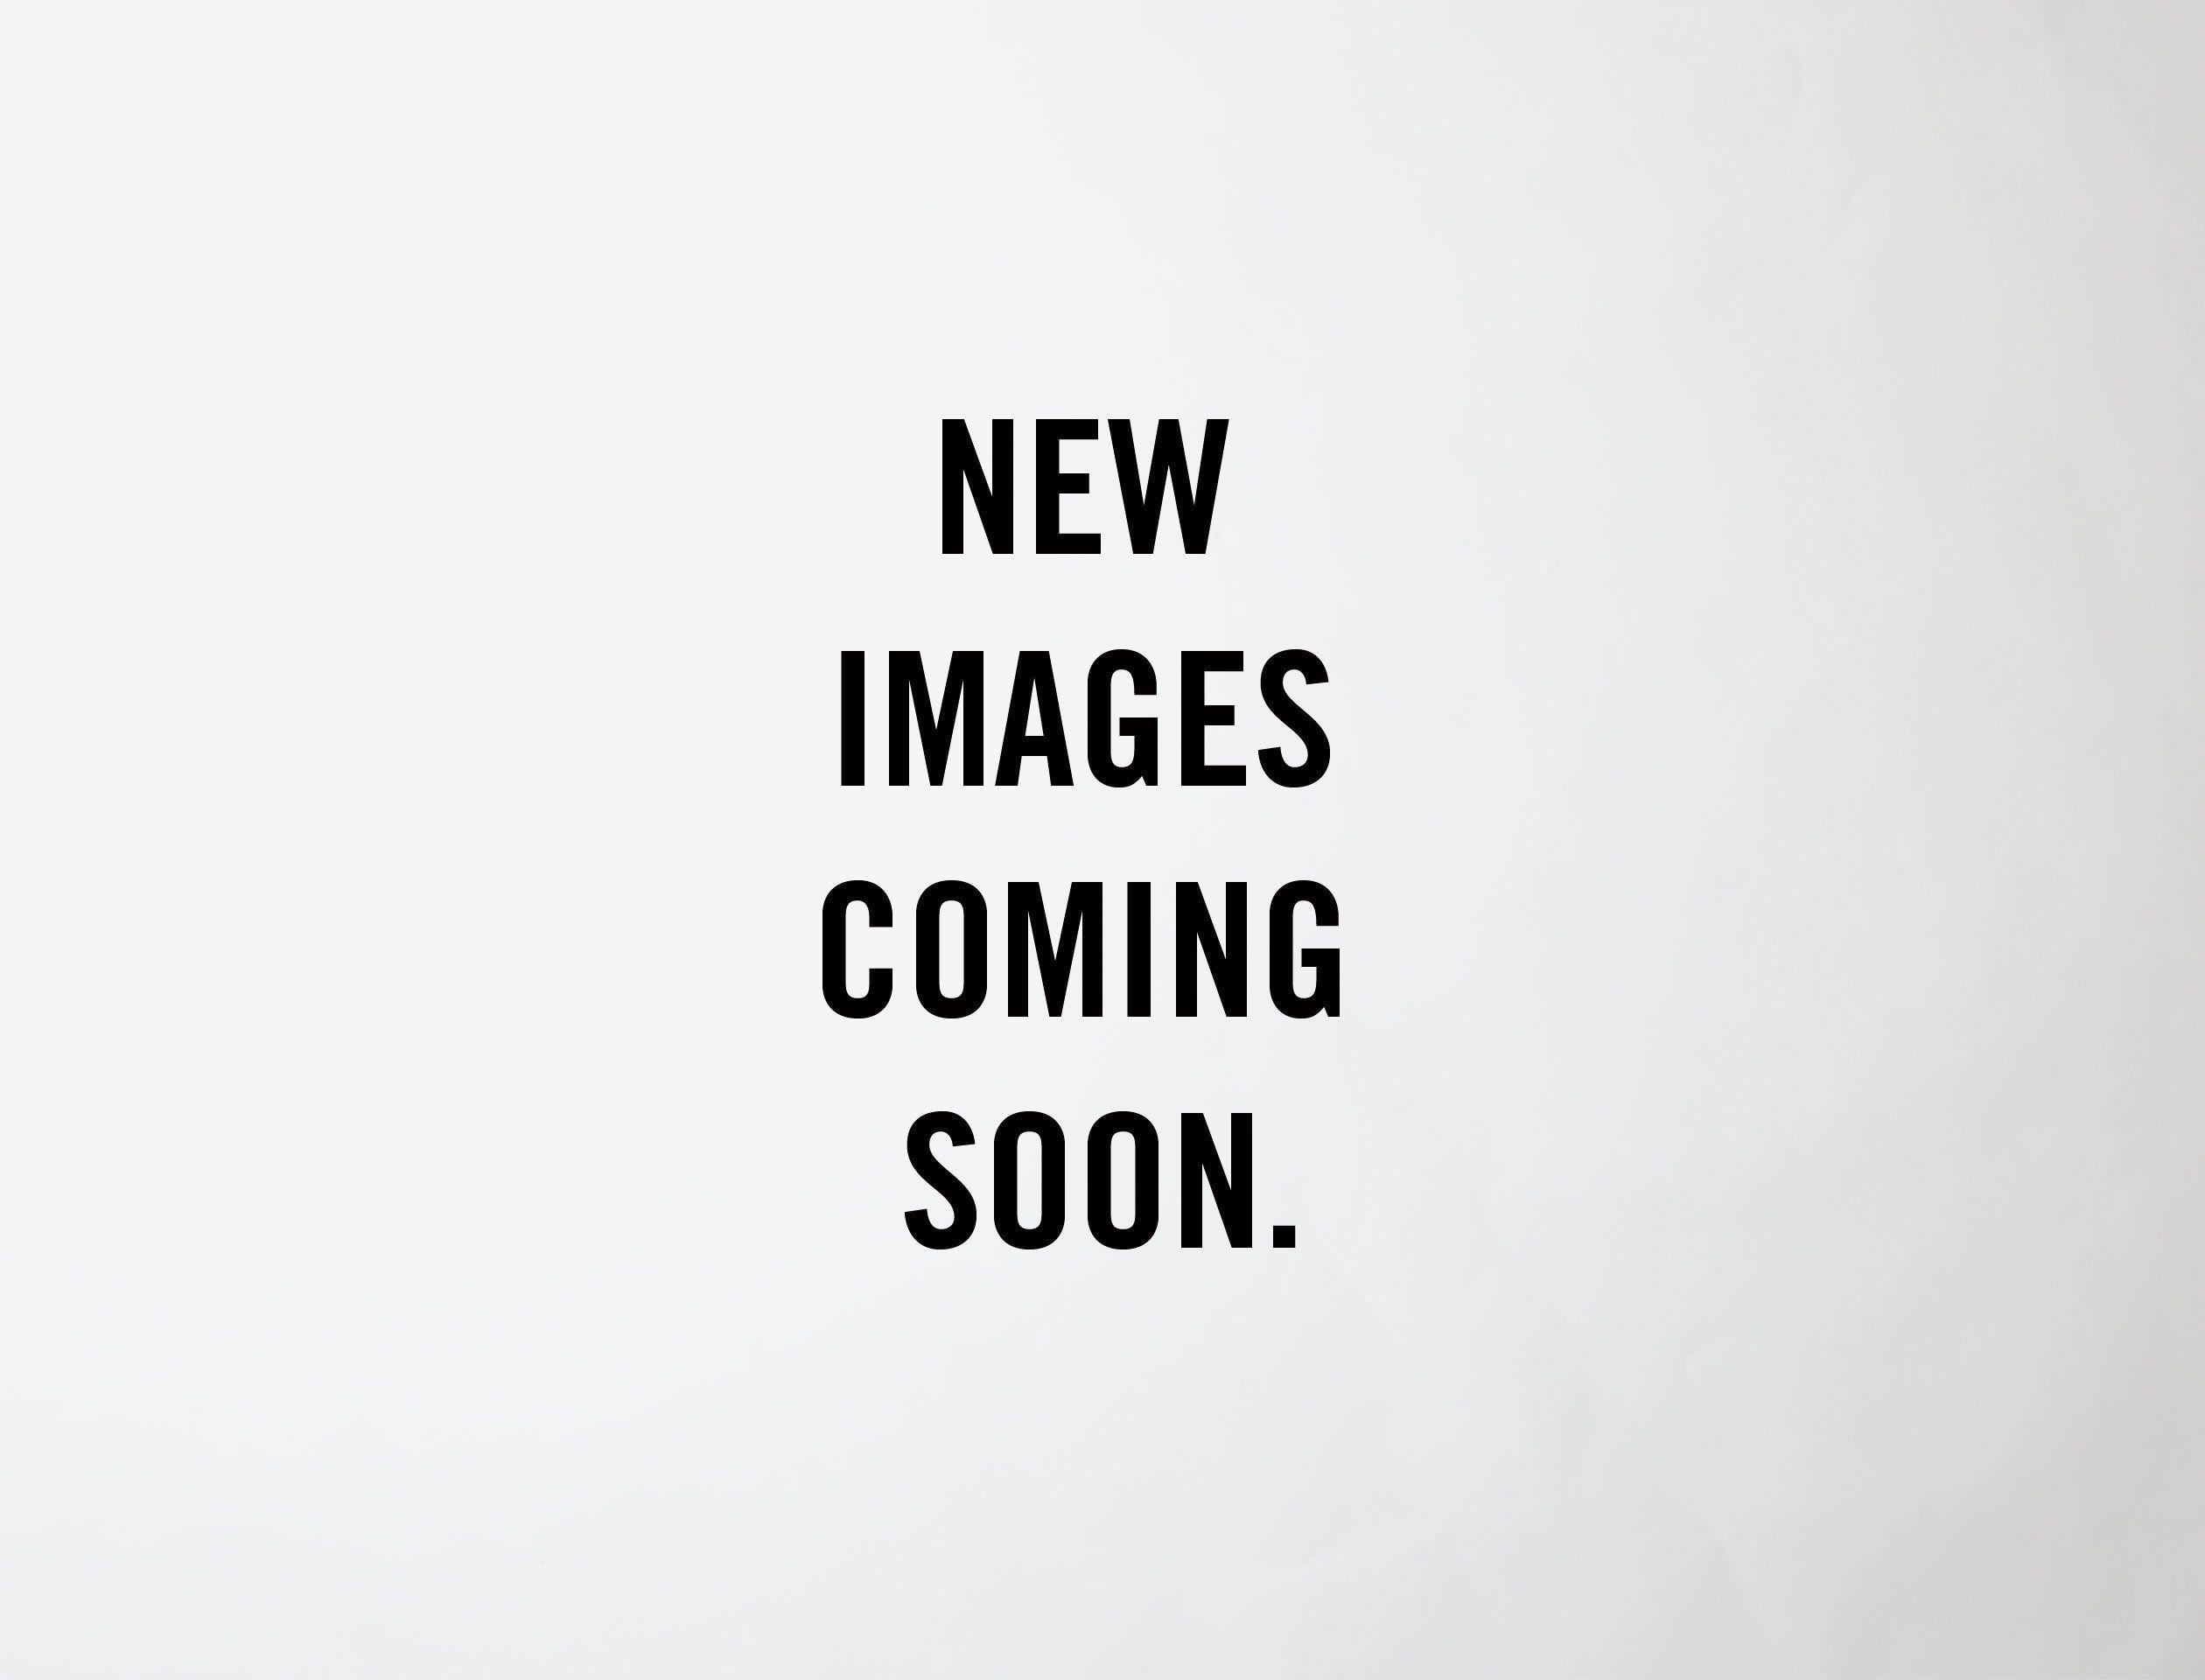 Coming Soon Background Images HD Pictures and Wallpaper For Free Download   Pngtree